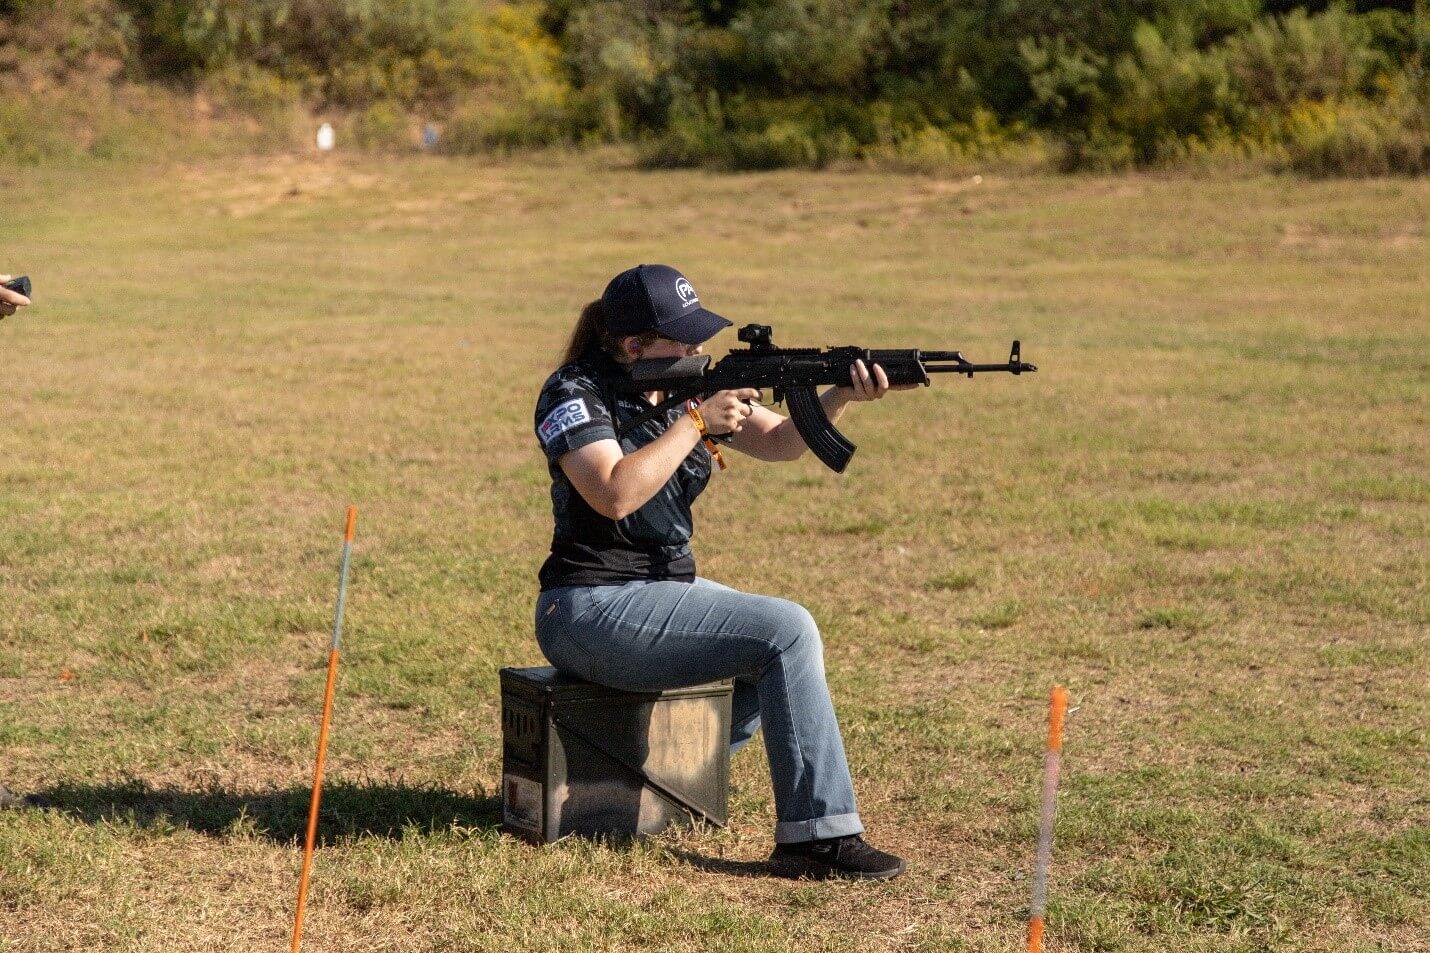 Shooting sports and women